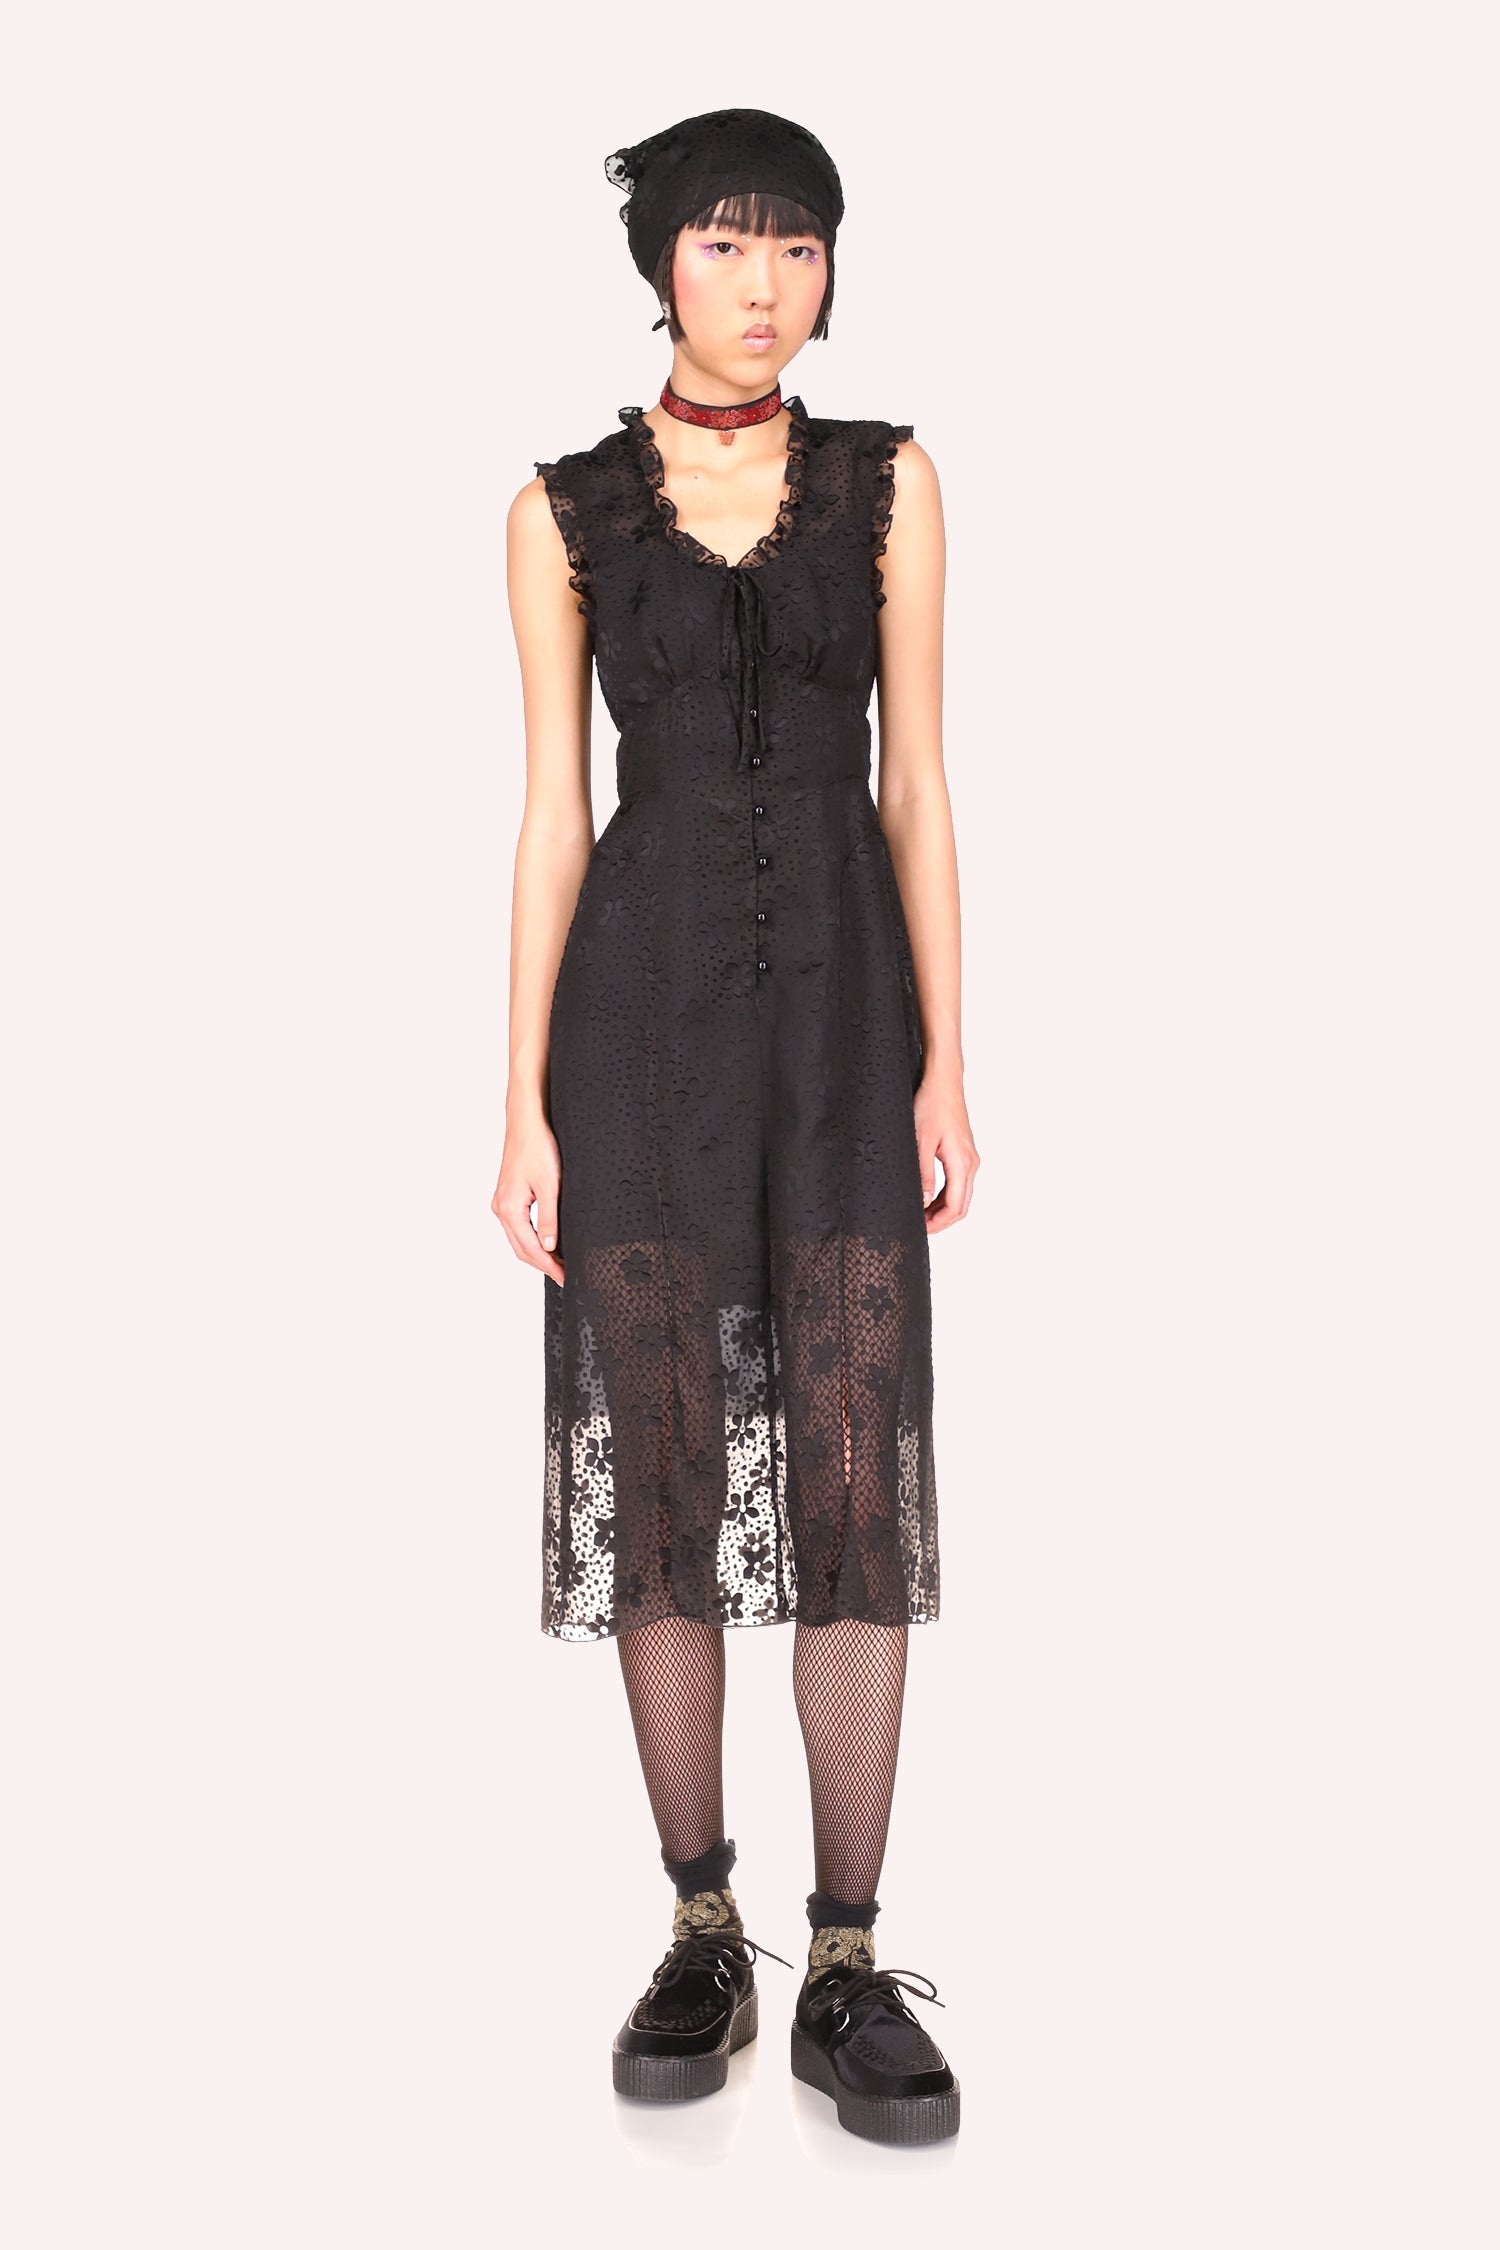 Daisy Dot Burnout Dress Black, V-neck, a tie closure, 6-black buttons, small slit at thigh, form-fitting at the waist